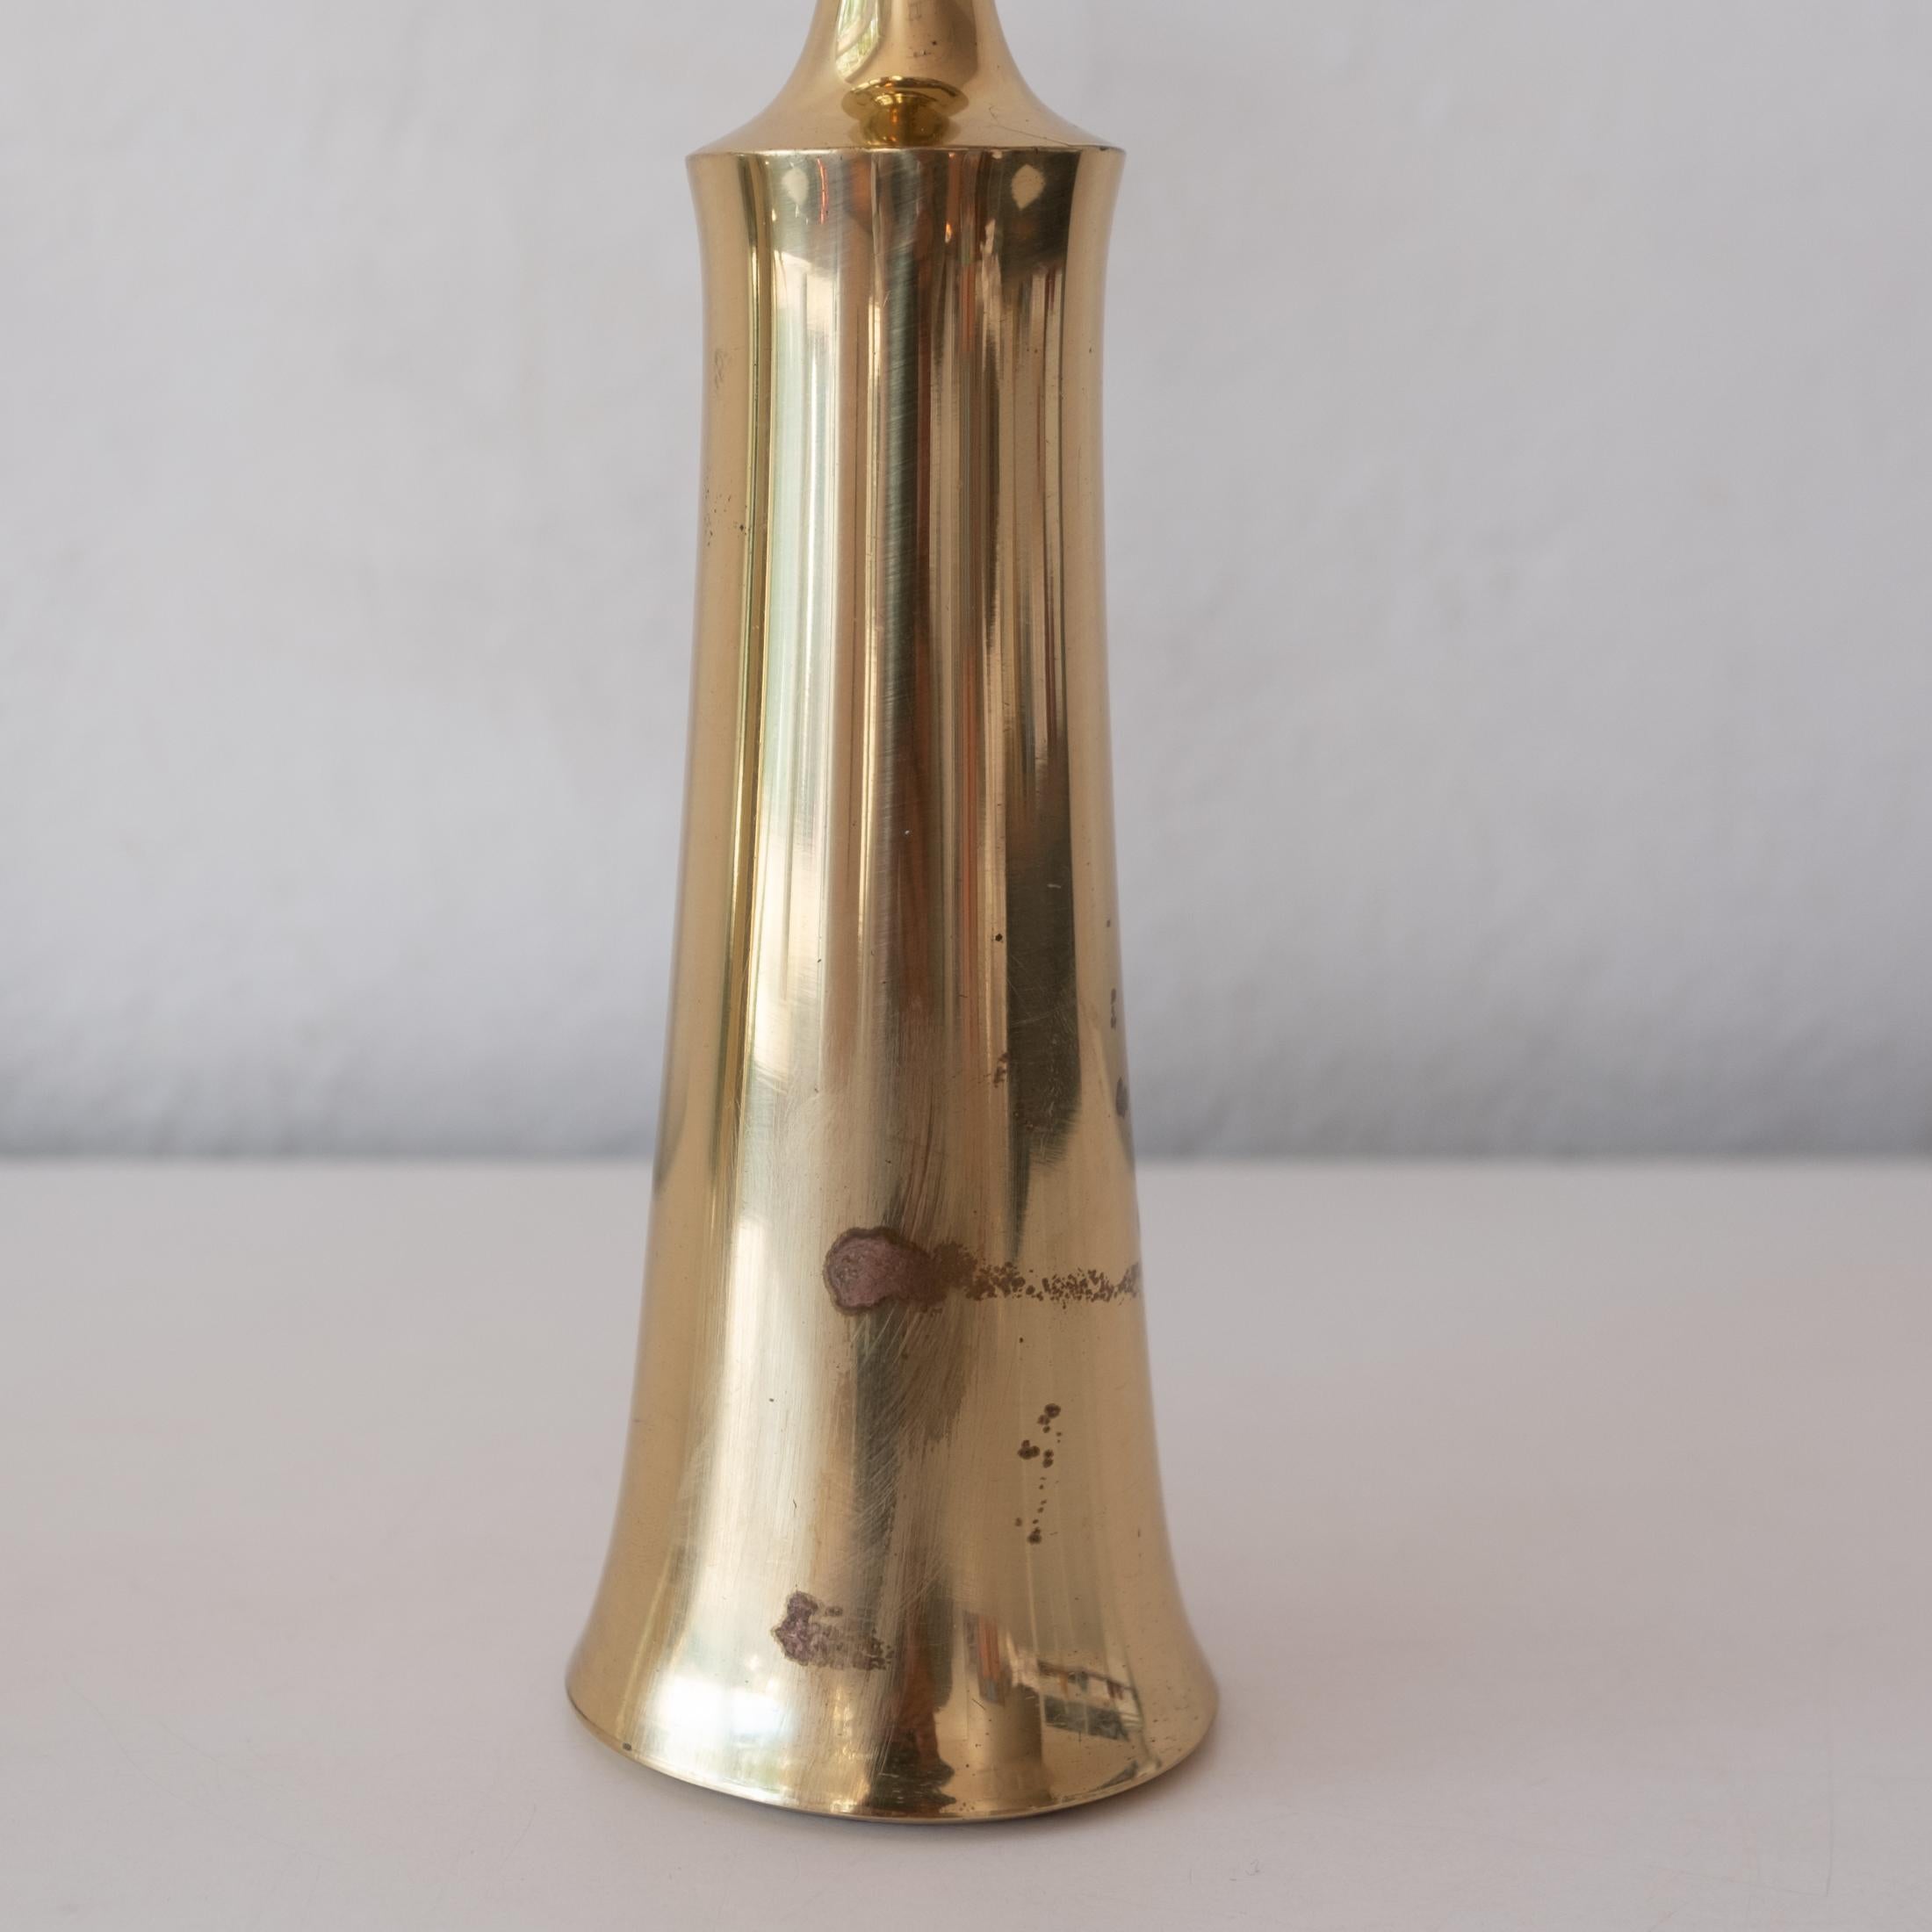 Brass Candlesticks by Jens Quistgaard for Dansk In Good Condition For Sale In San Diego, CA